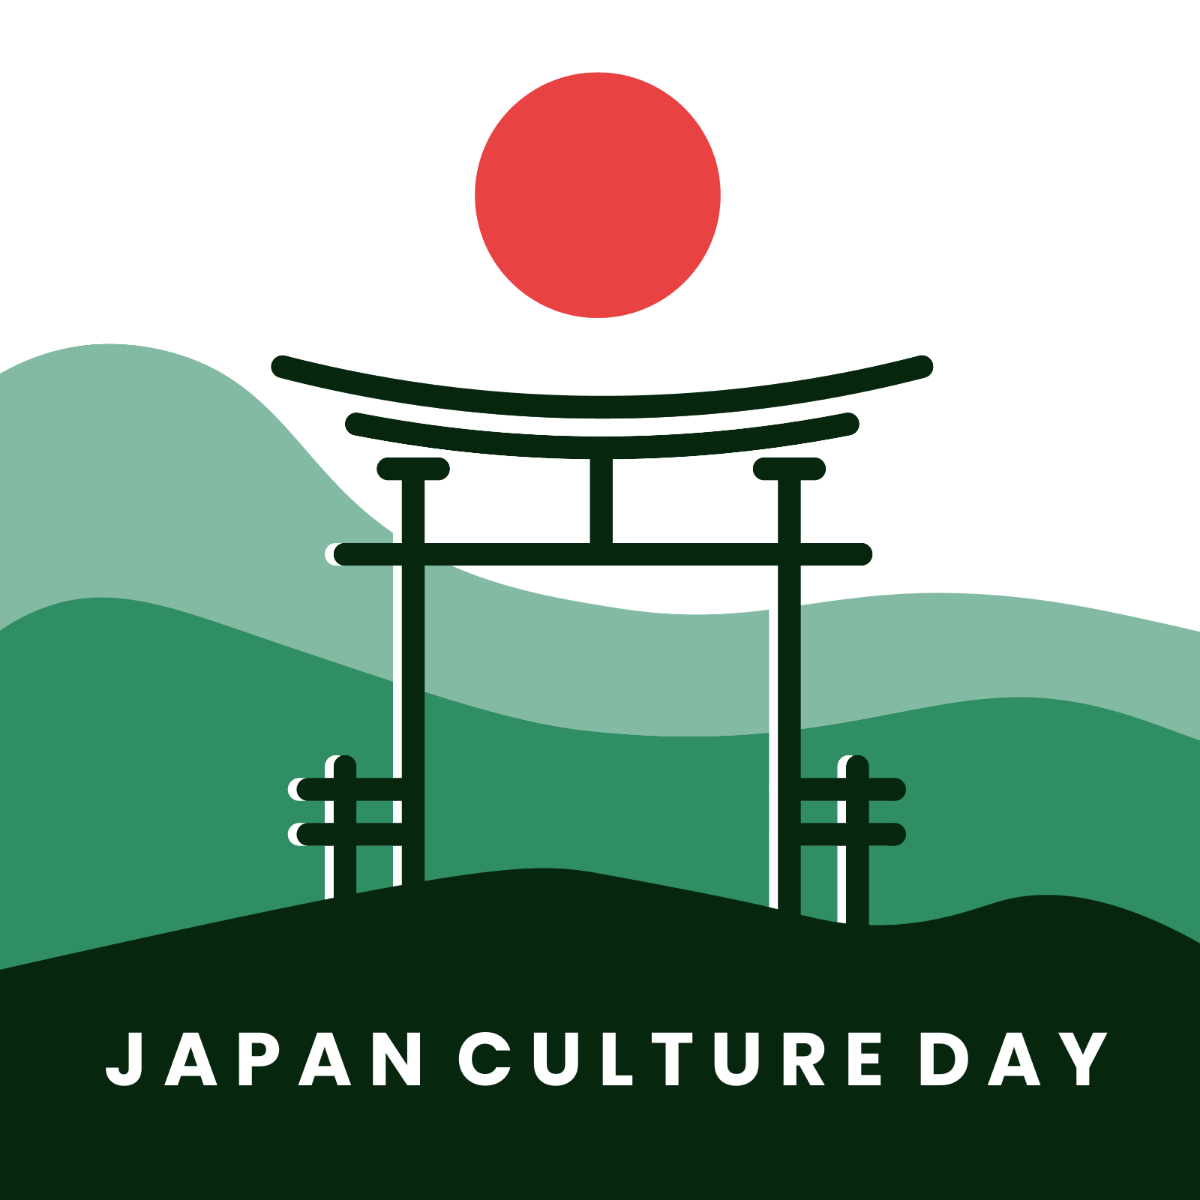 Japan Culture Day WhatsApp Post Template